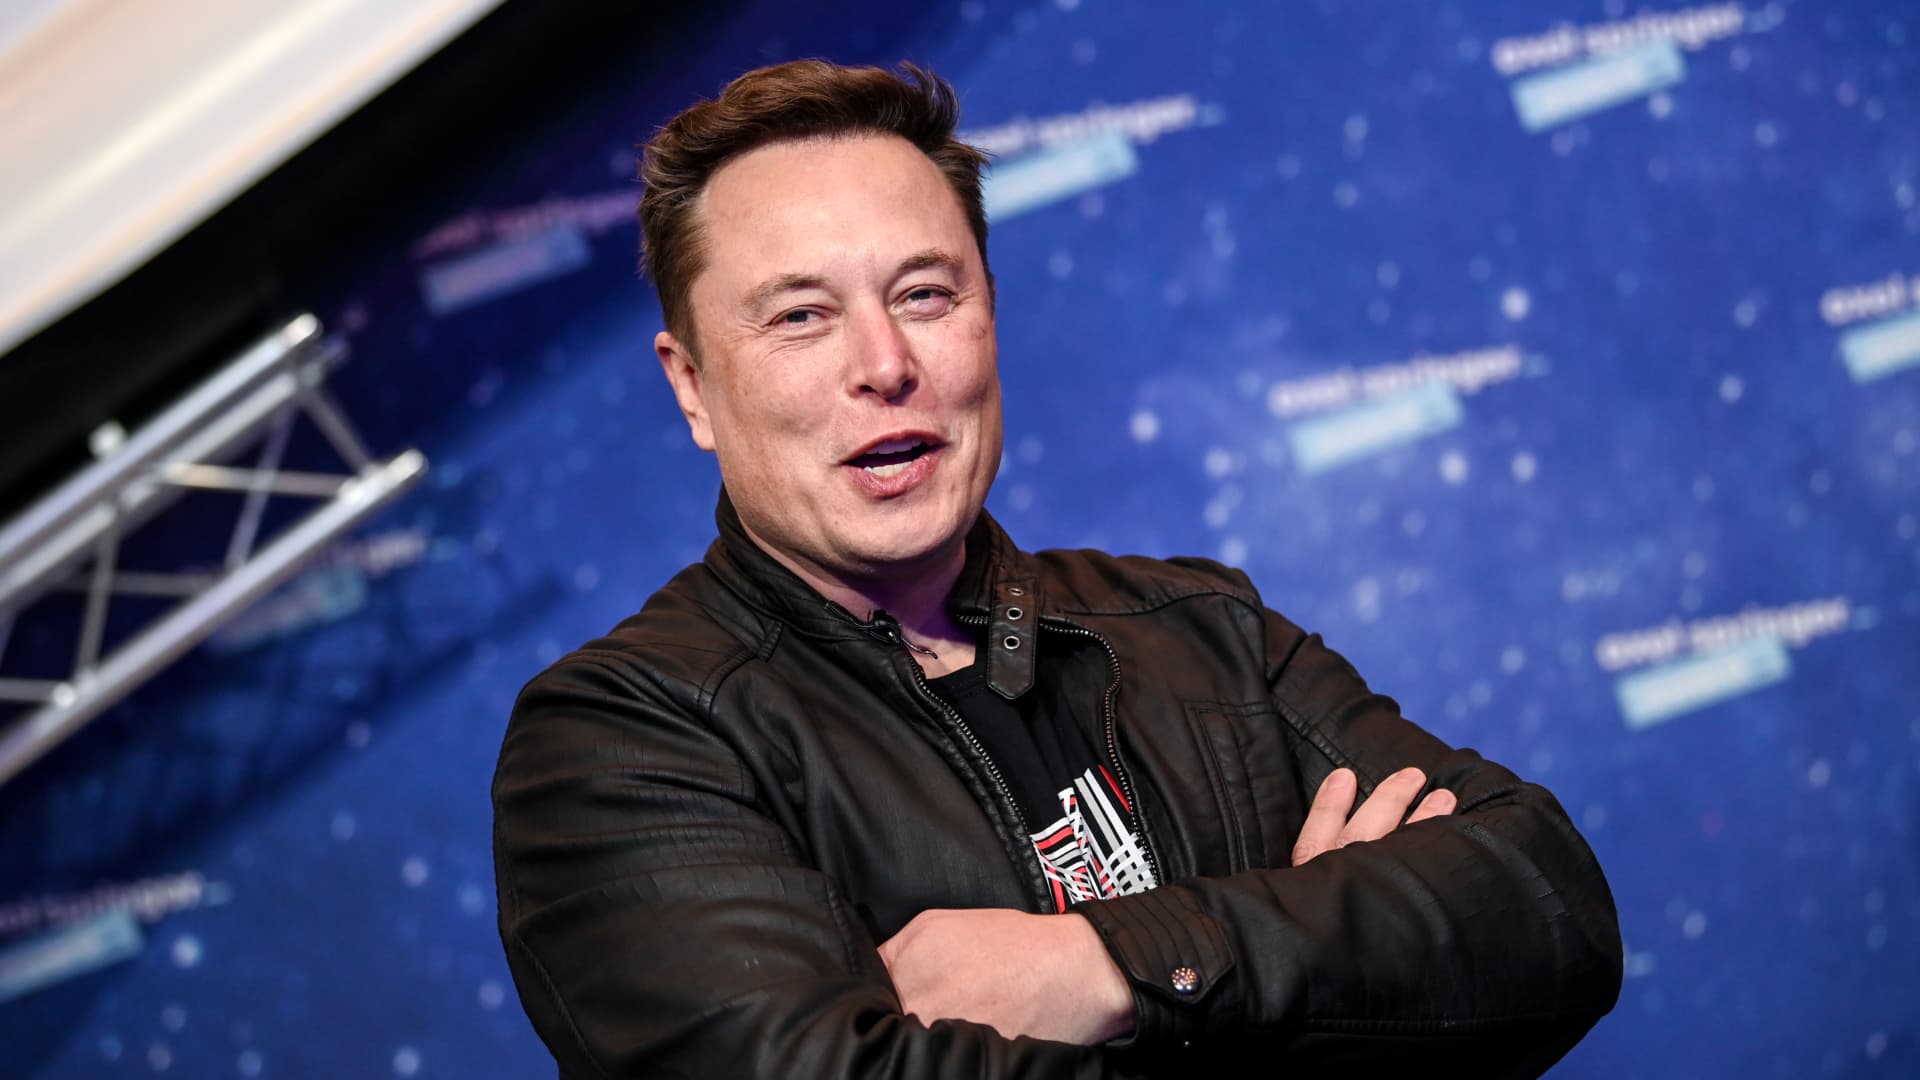 Twitter seeking documents related to federal investigation of Elon Musk